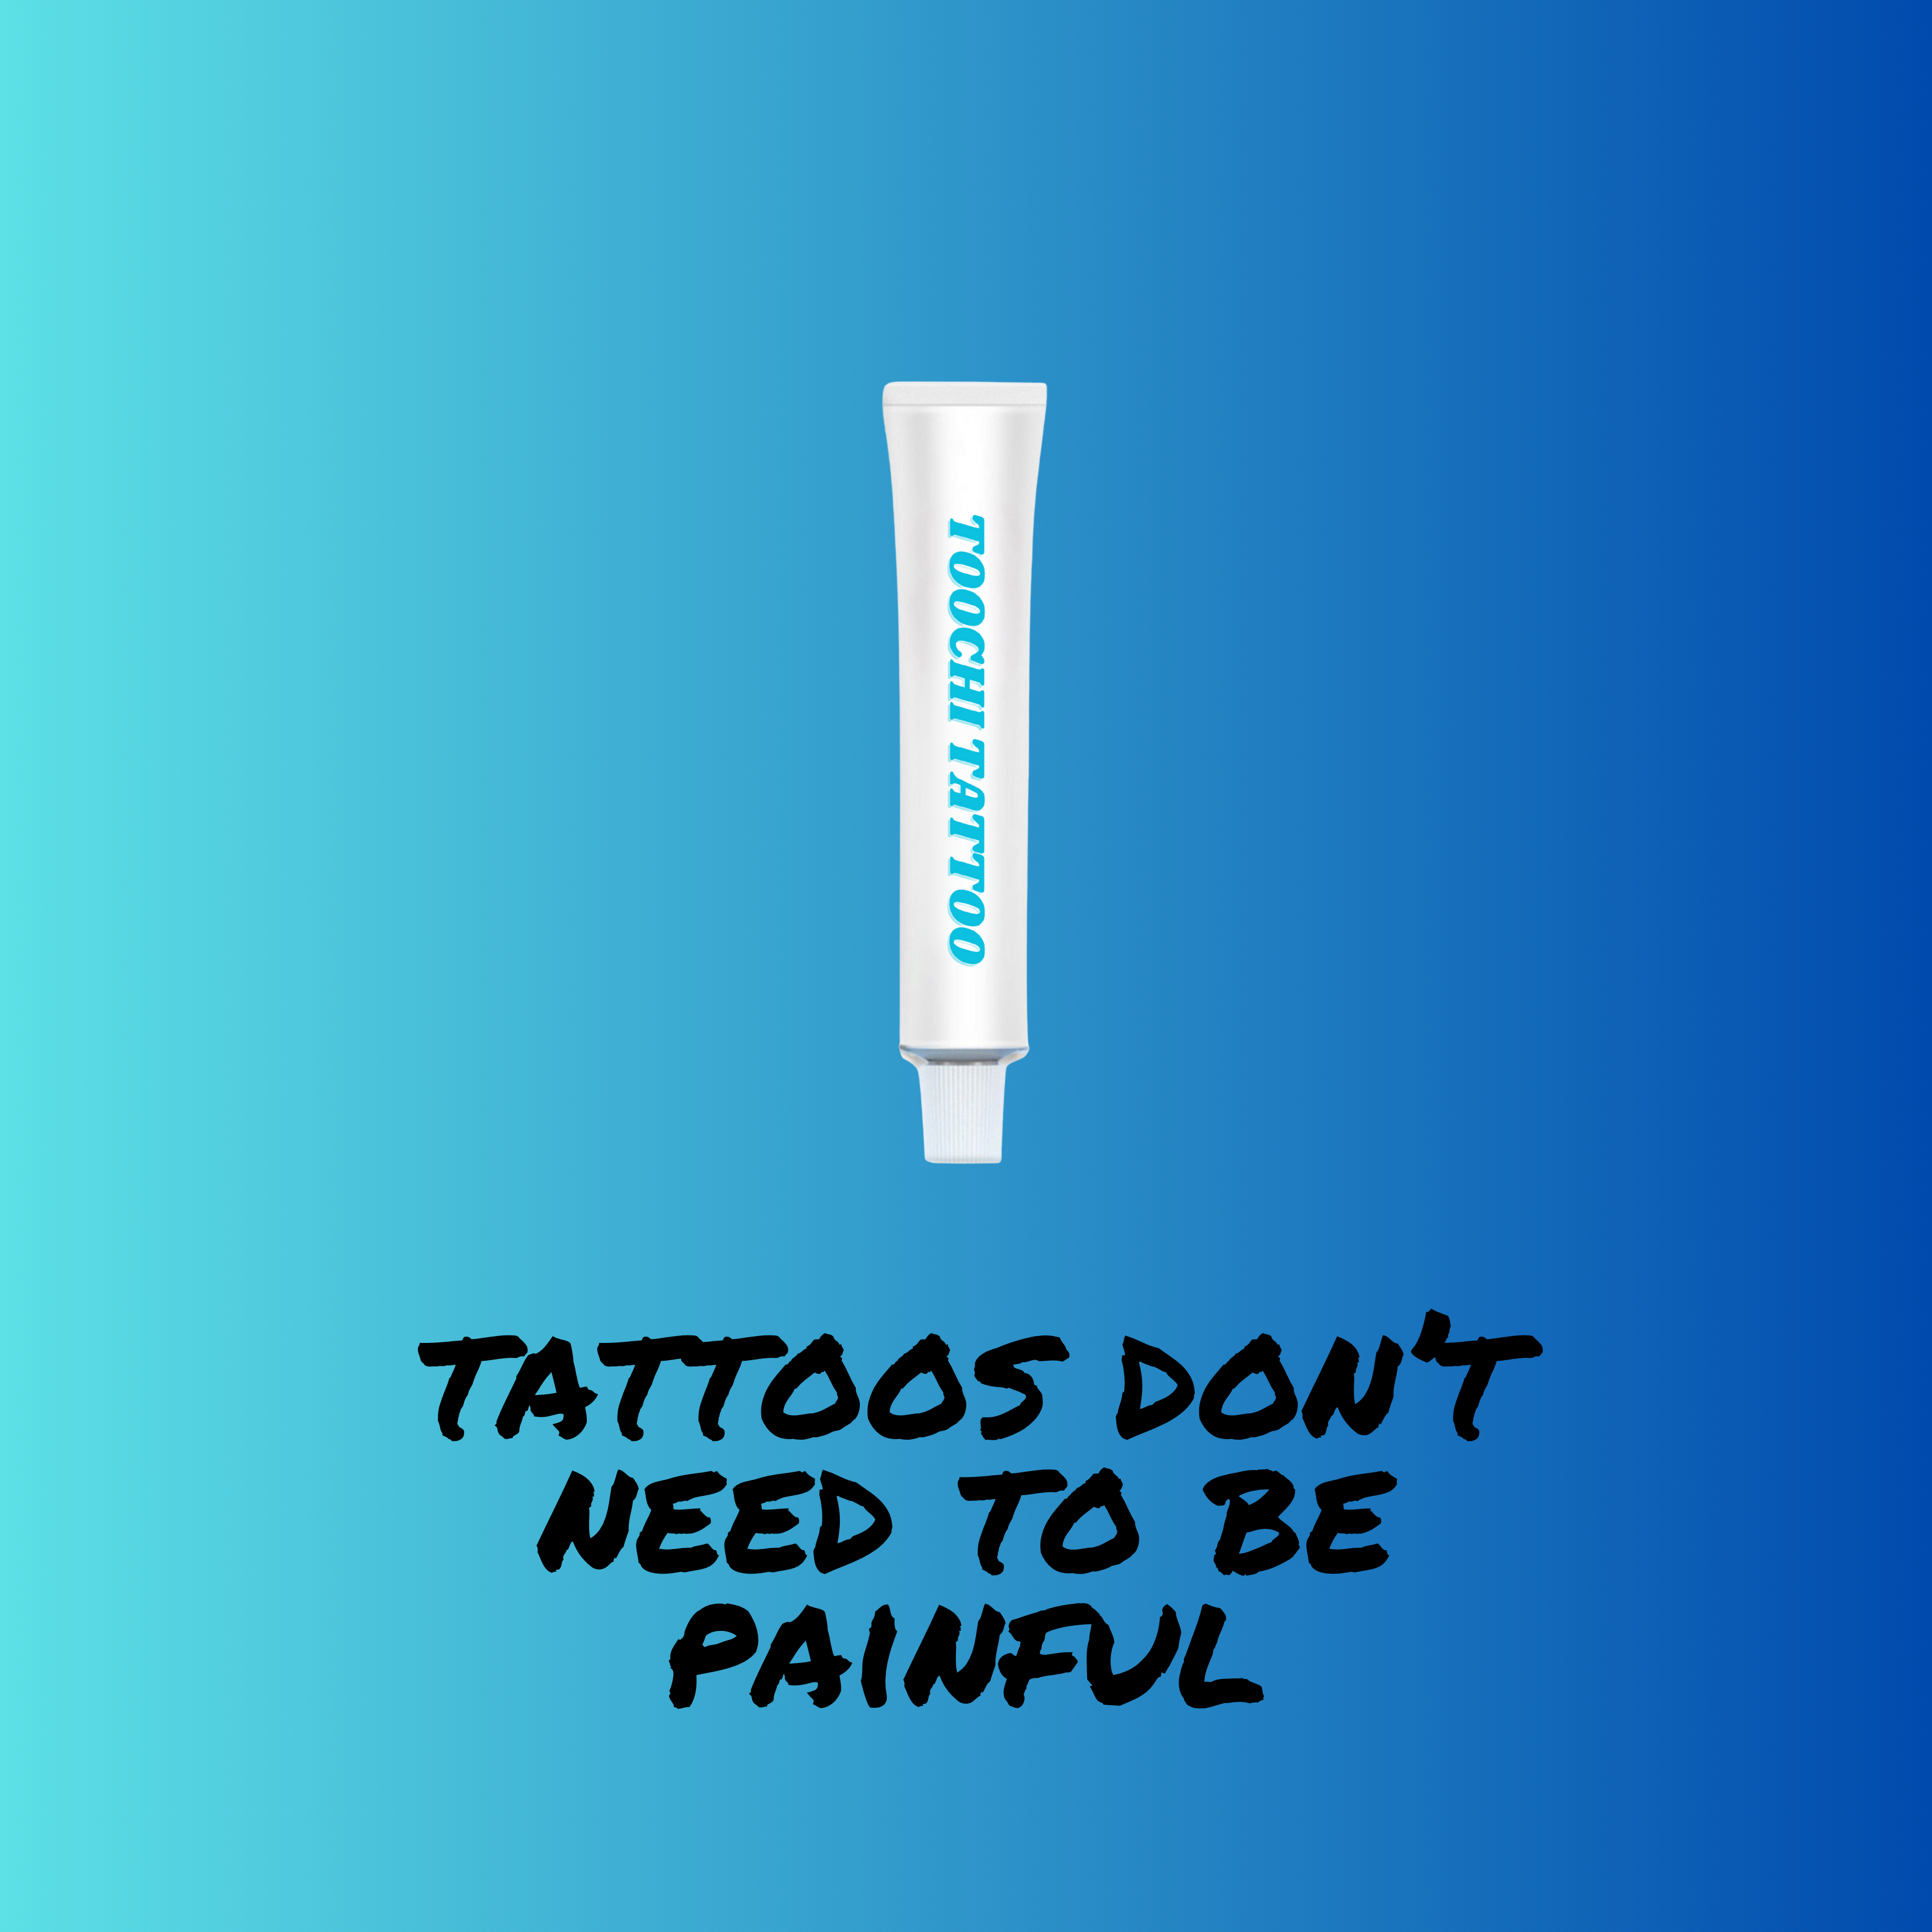 Does tattoo numbing cream affect the ink?